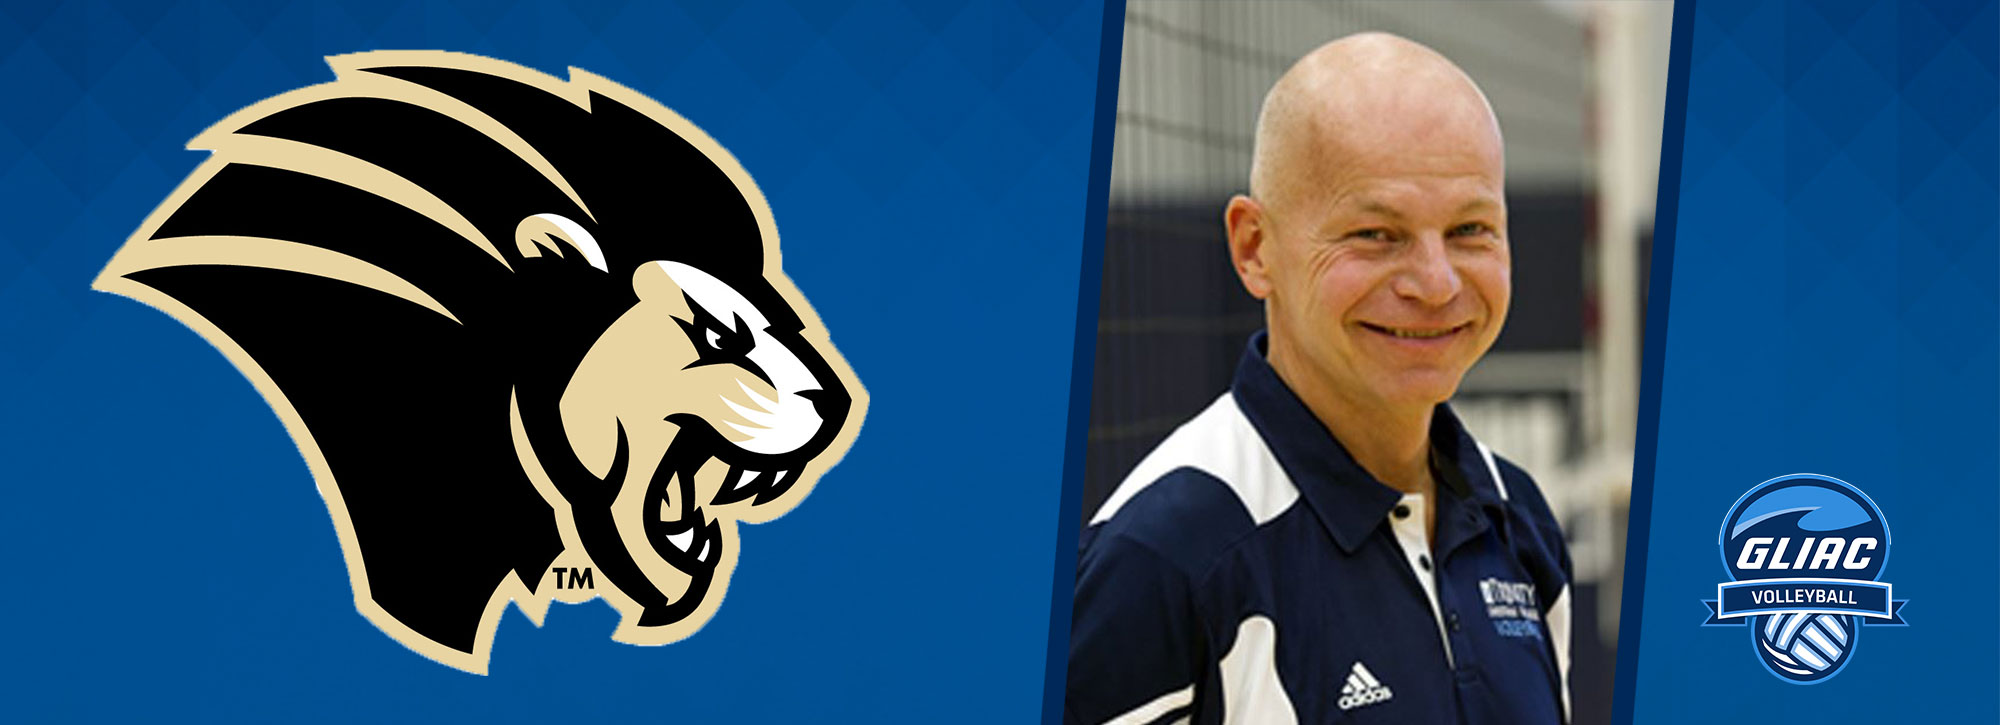 PNW Announces Appointment of Bill Schepel as Head Volleyball Coach